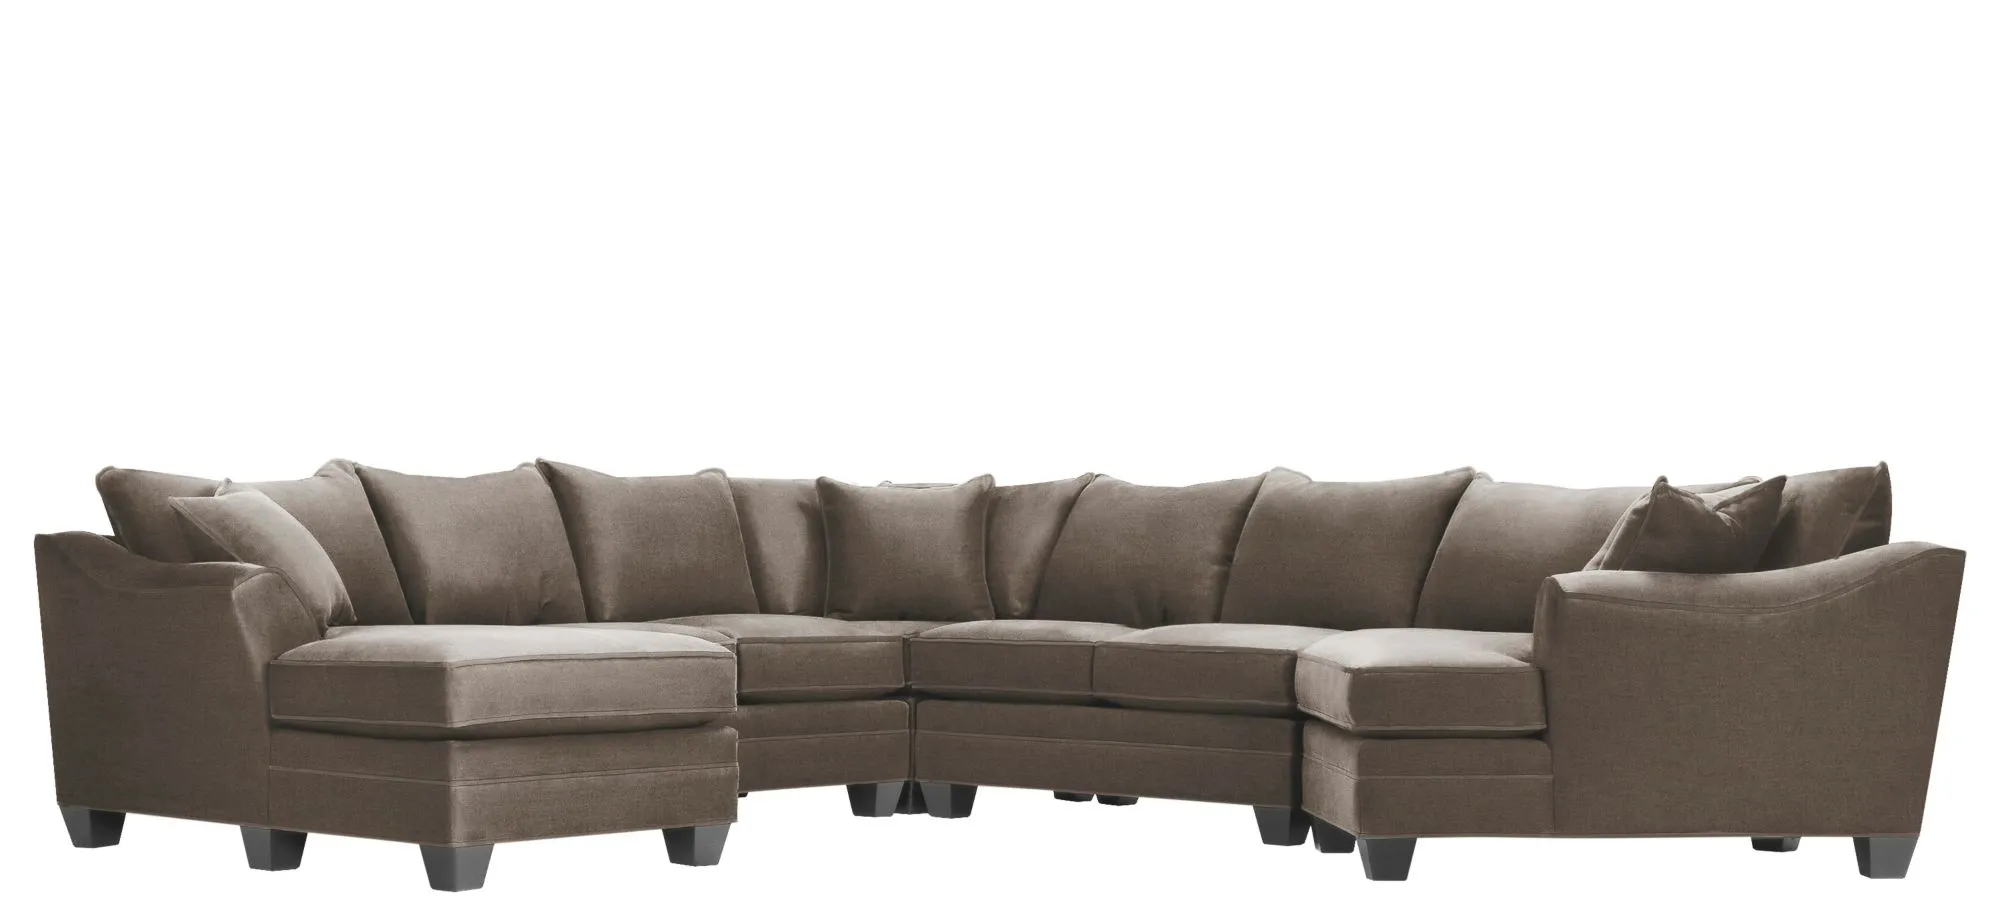 Foresthill 5-pc. Left Hand Facing Sectional Sofa in Santa Rosa Taupe by H.M. Richards